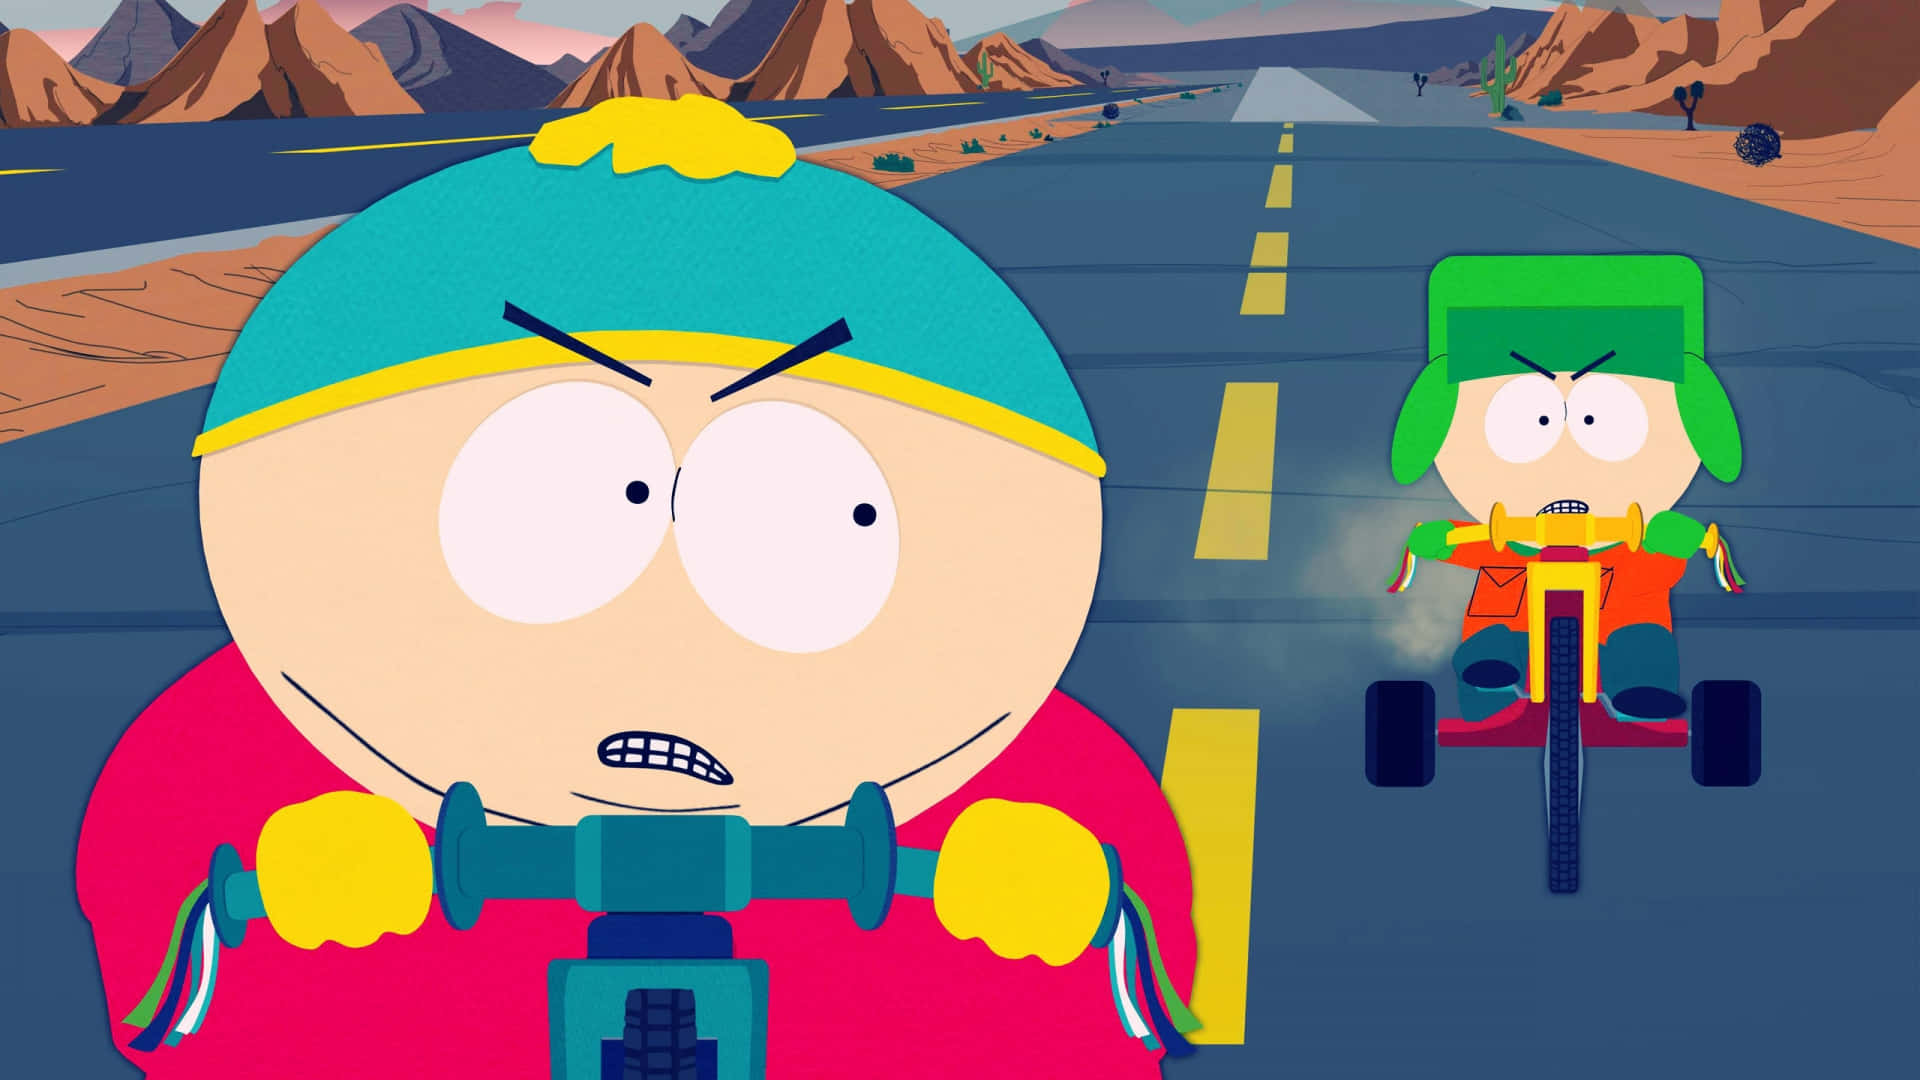 Introducing South Park's Most Iconic Characters